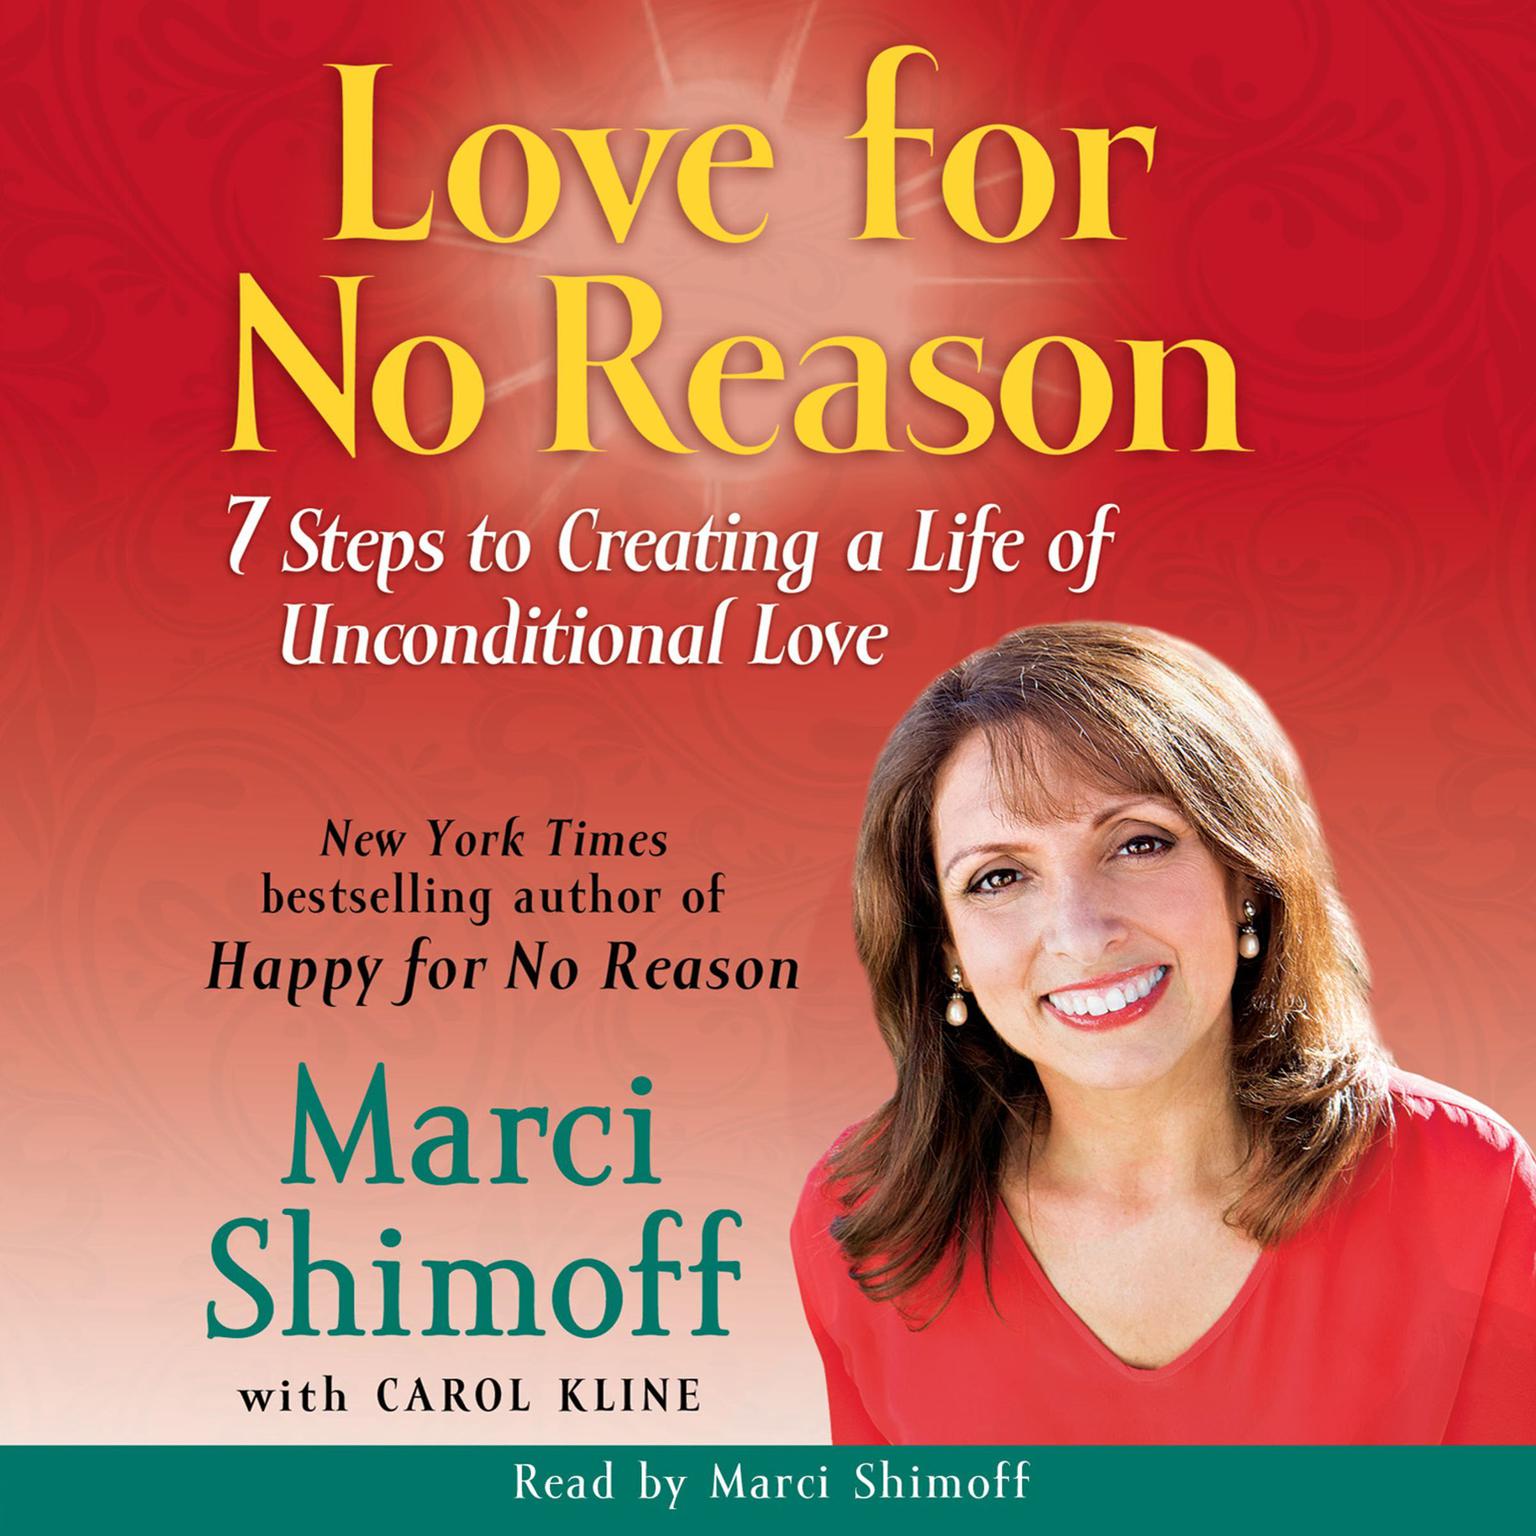 Love For No Reason (Abridged): 7 Steps to Creating a Life of Unconditional Love Audiobook, by Marci Shimoff